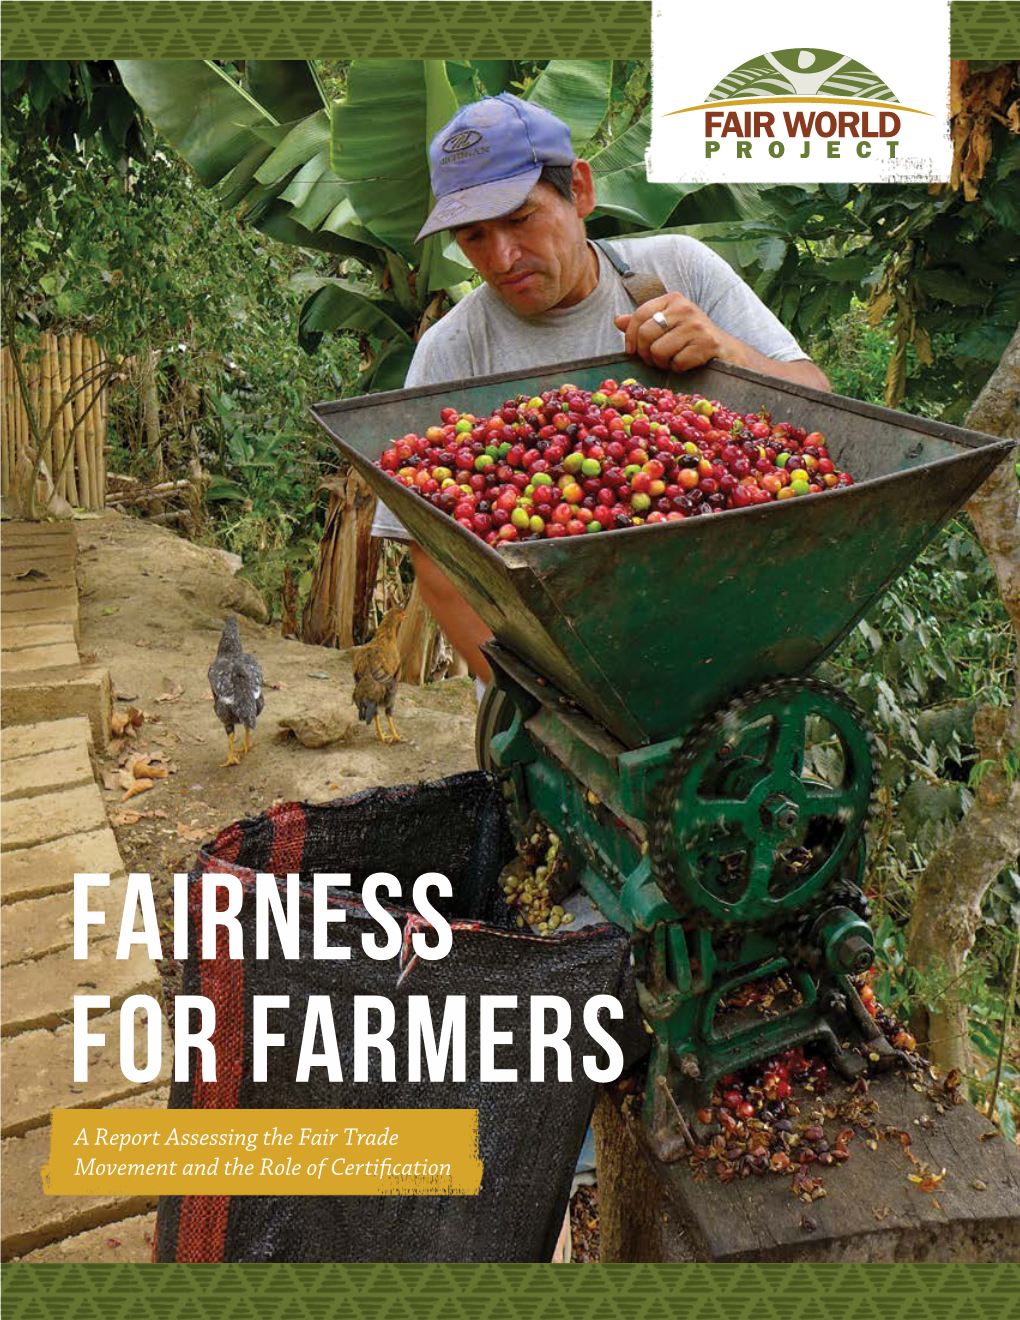 “Fairness for Farmers” Report